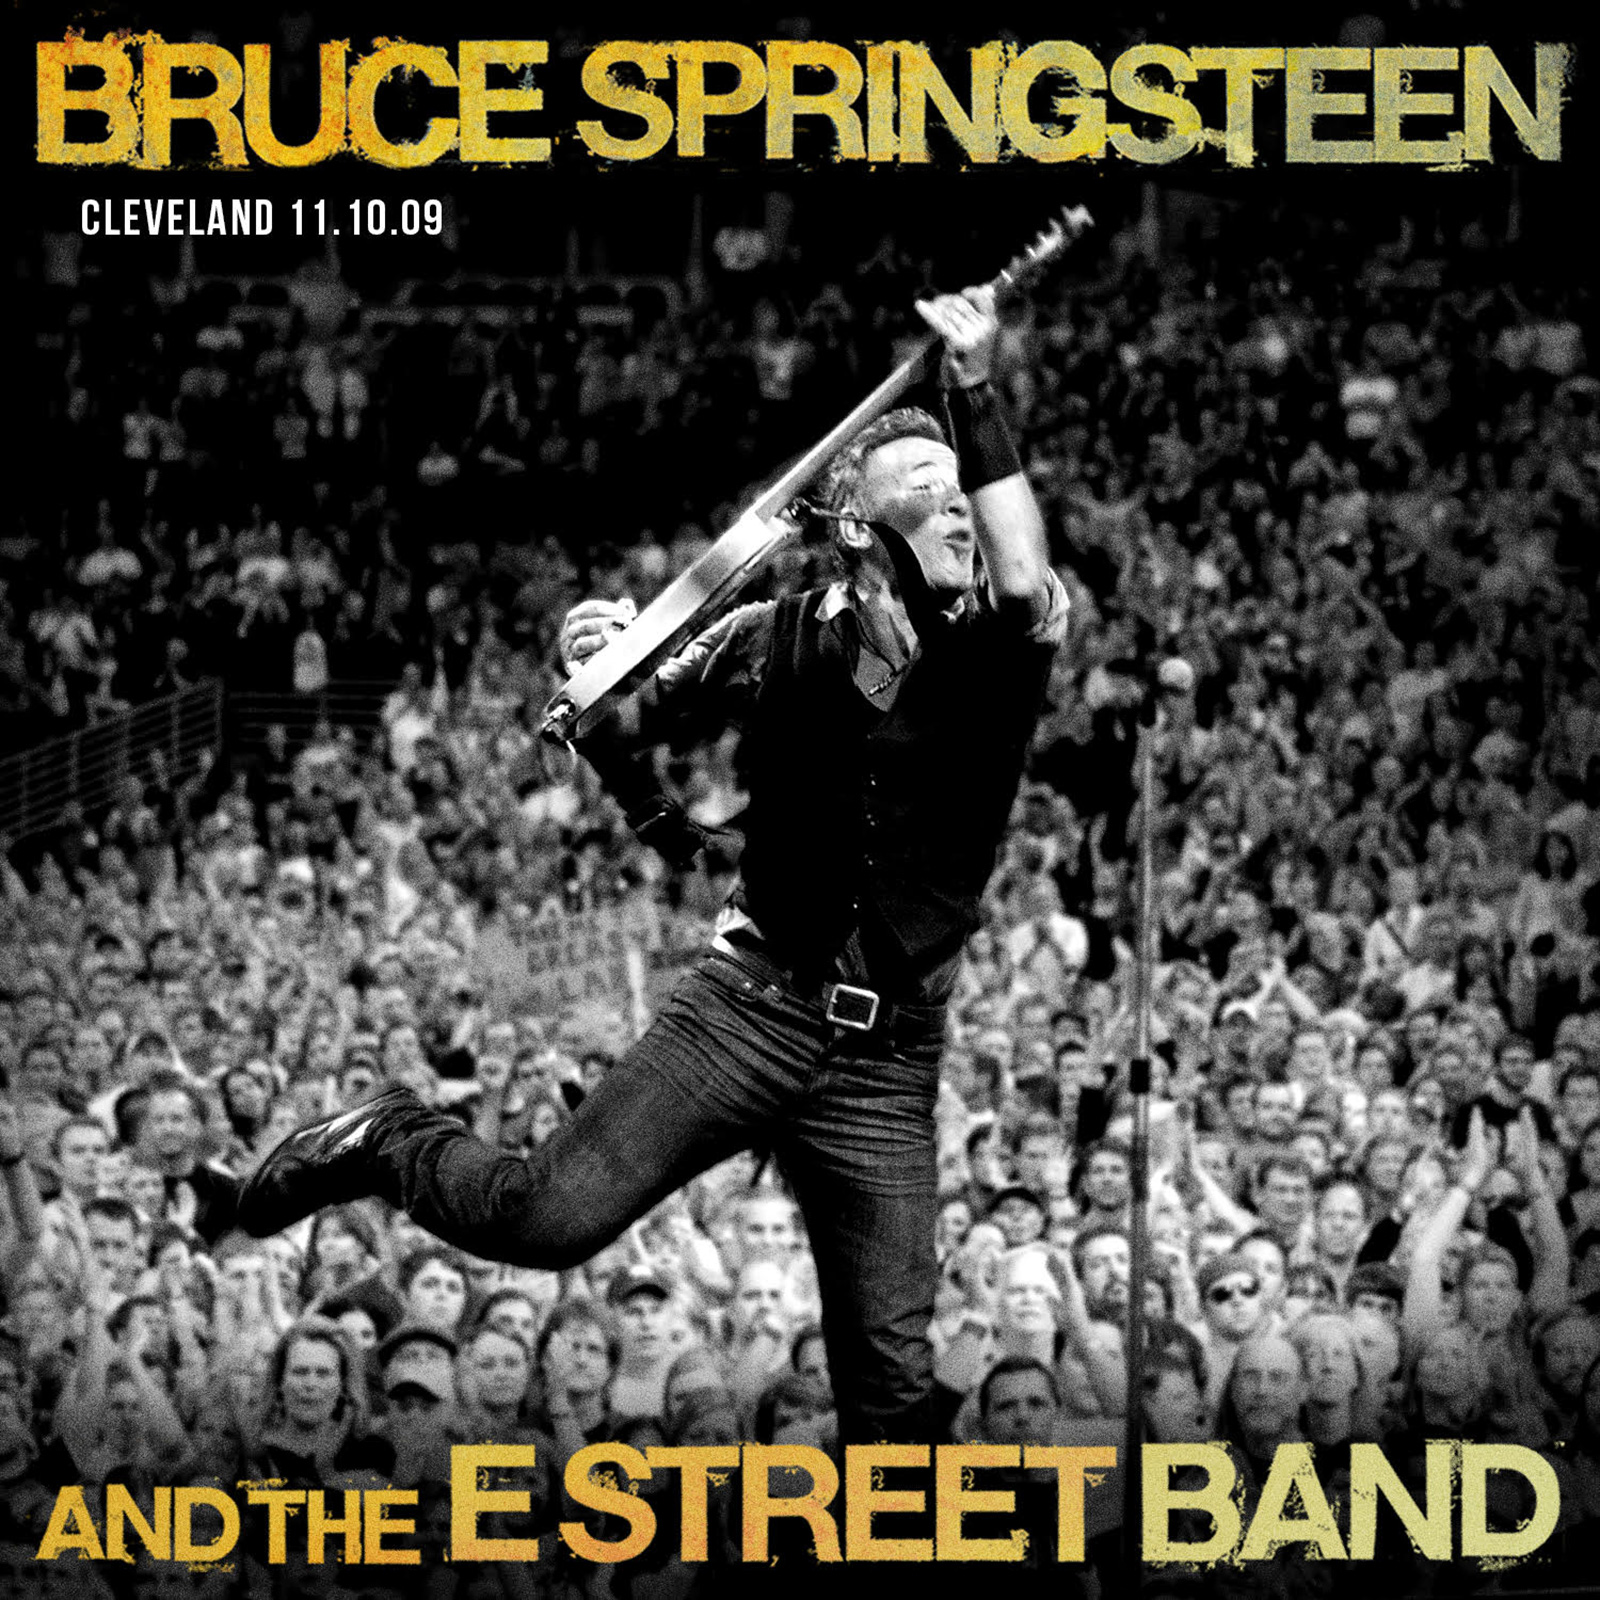 Bruce Springsteen & The E Street Band – 2009-11-10 Quicken Loans Arena, Cleveland, OH (2022) [Official Digital Download 24bit/48kHz]